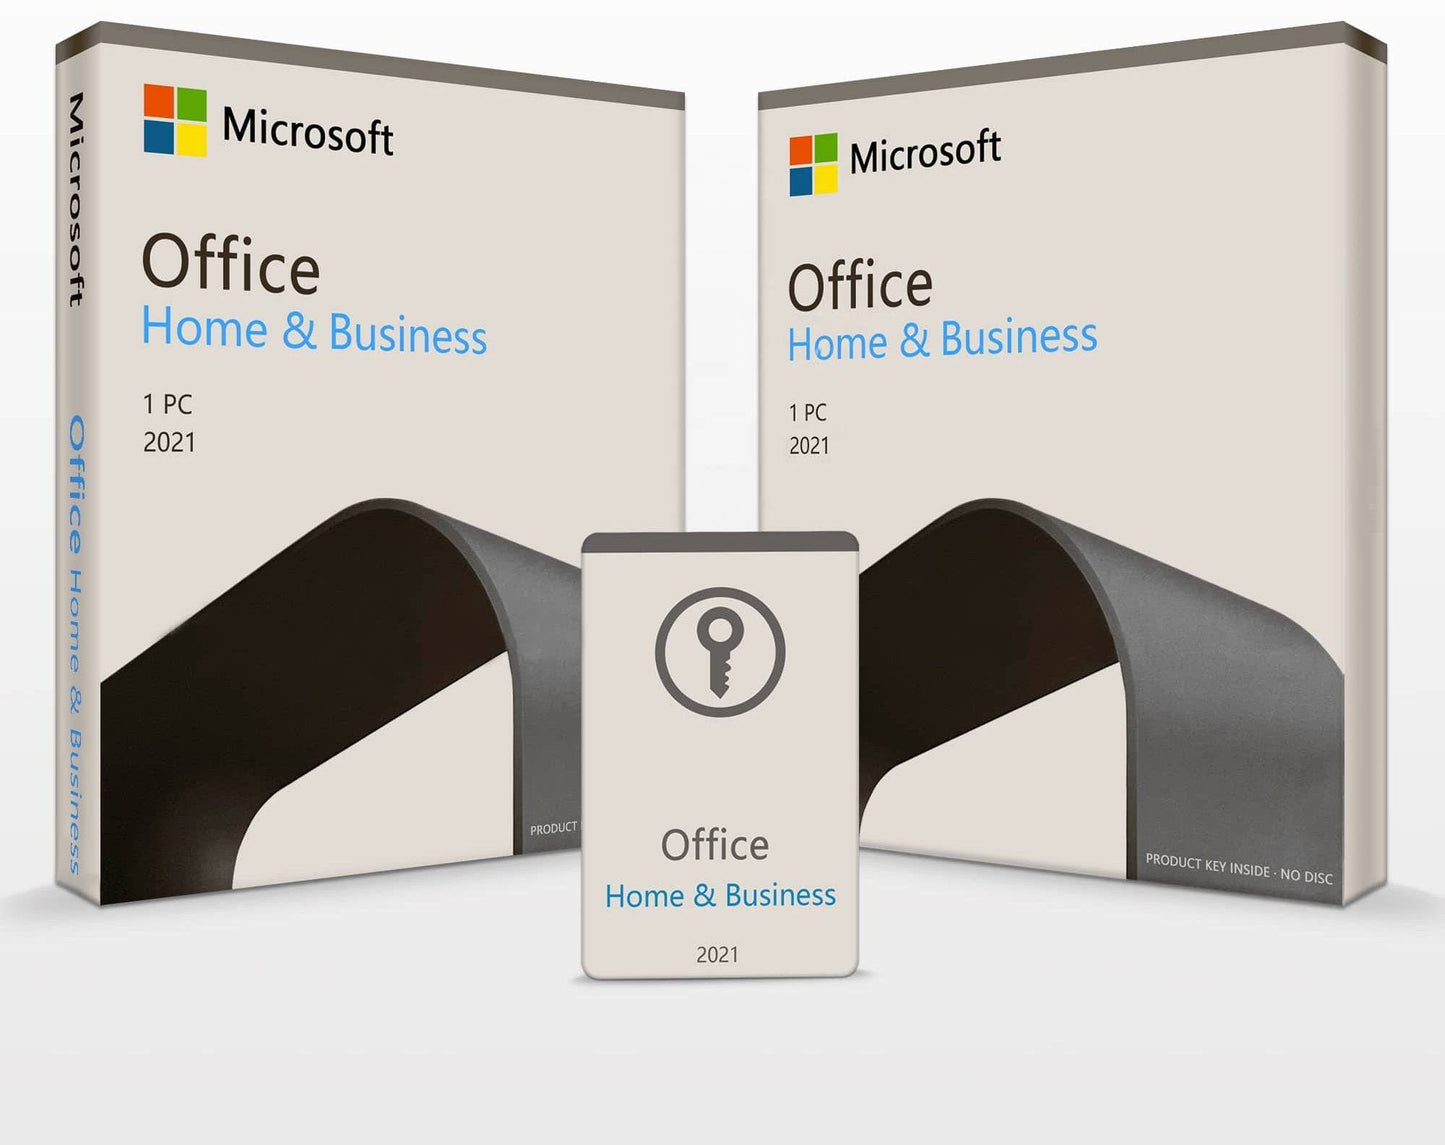 Microsoft Office 2021 Home and Business License Activation Key for 1 PC or MAC | Full Version | Retail Sealed Box | Australian Stock - INFINITE-ITECH